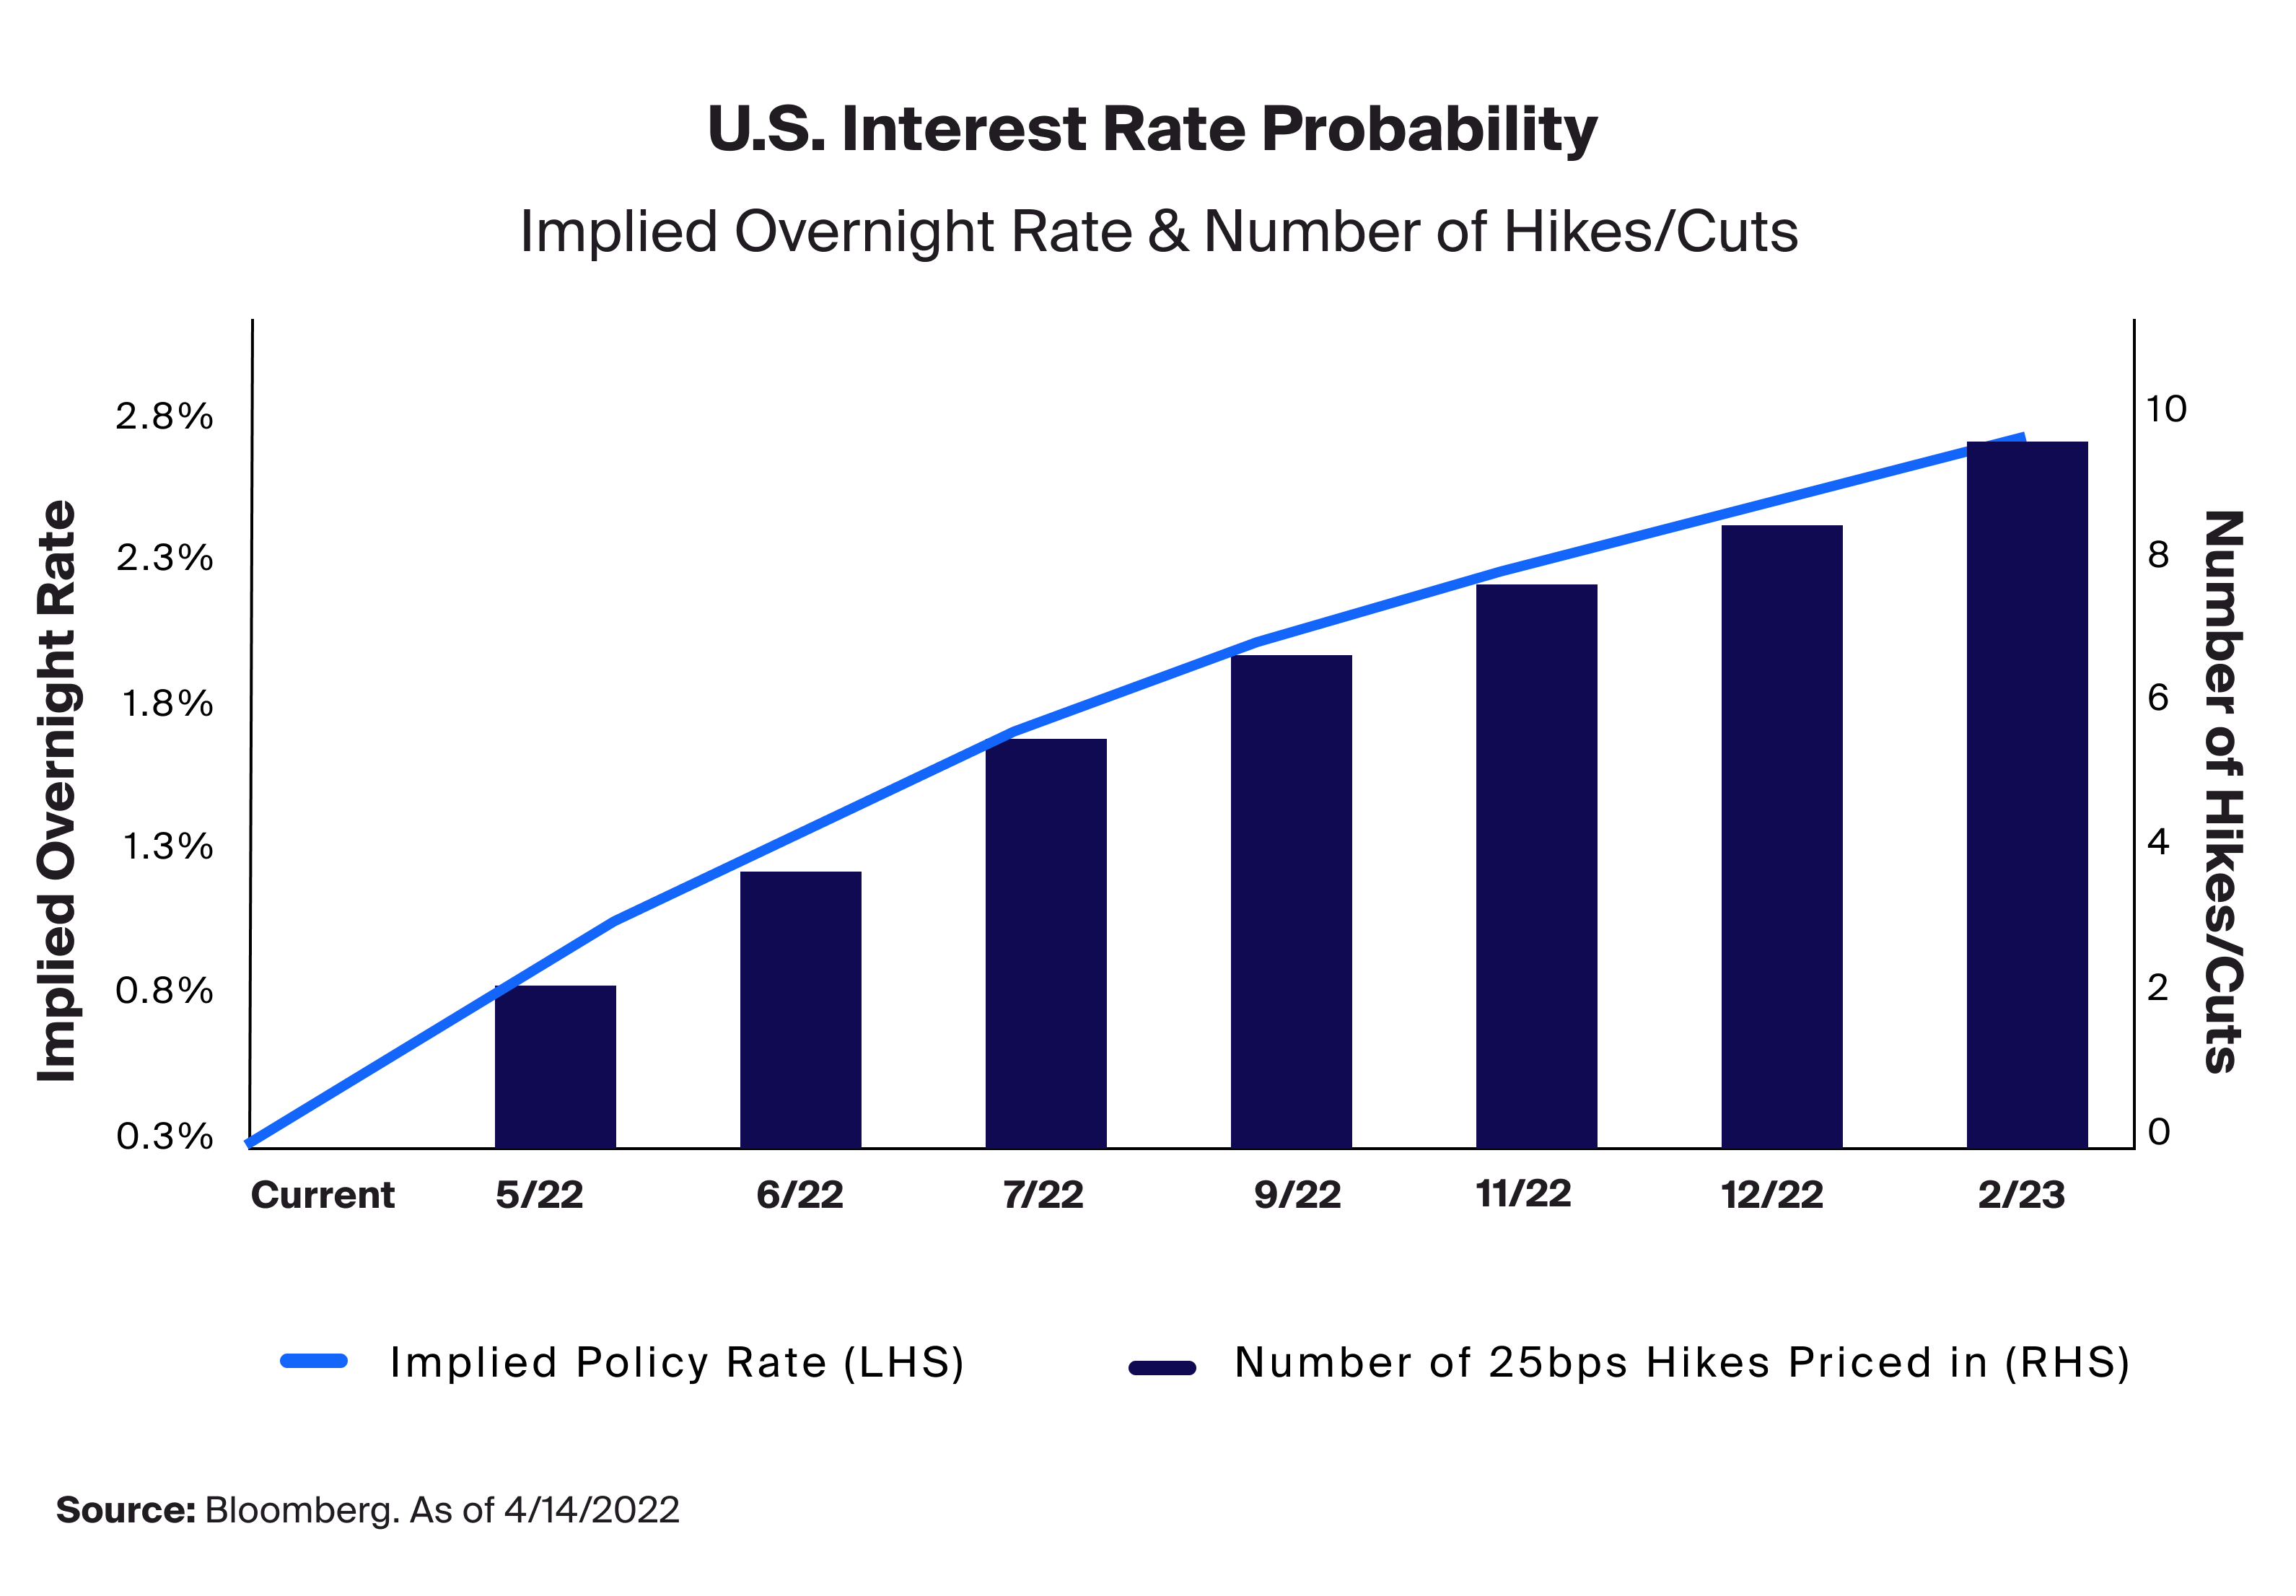 U.S. Interest Rate Probability: Implied Overnight Rate & Number of Hikes/Cuts